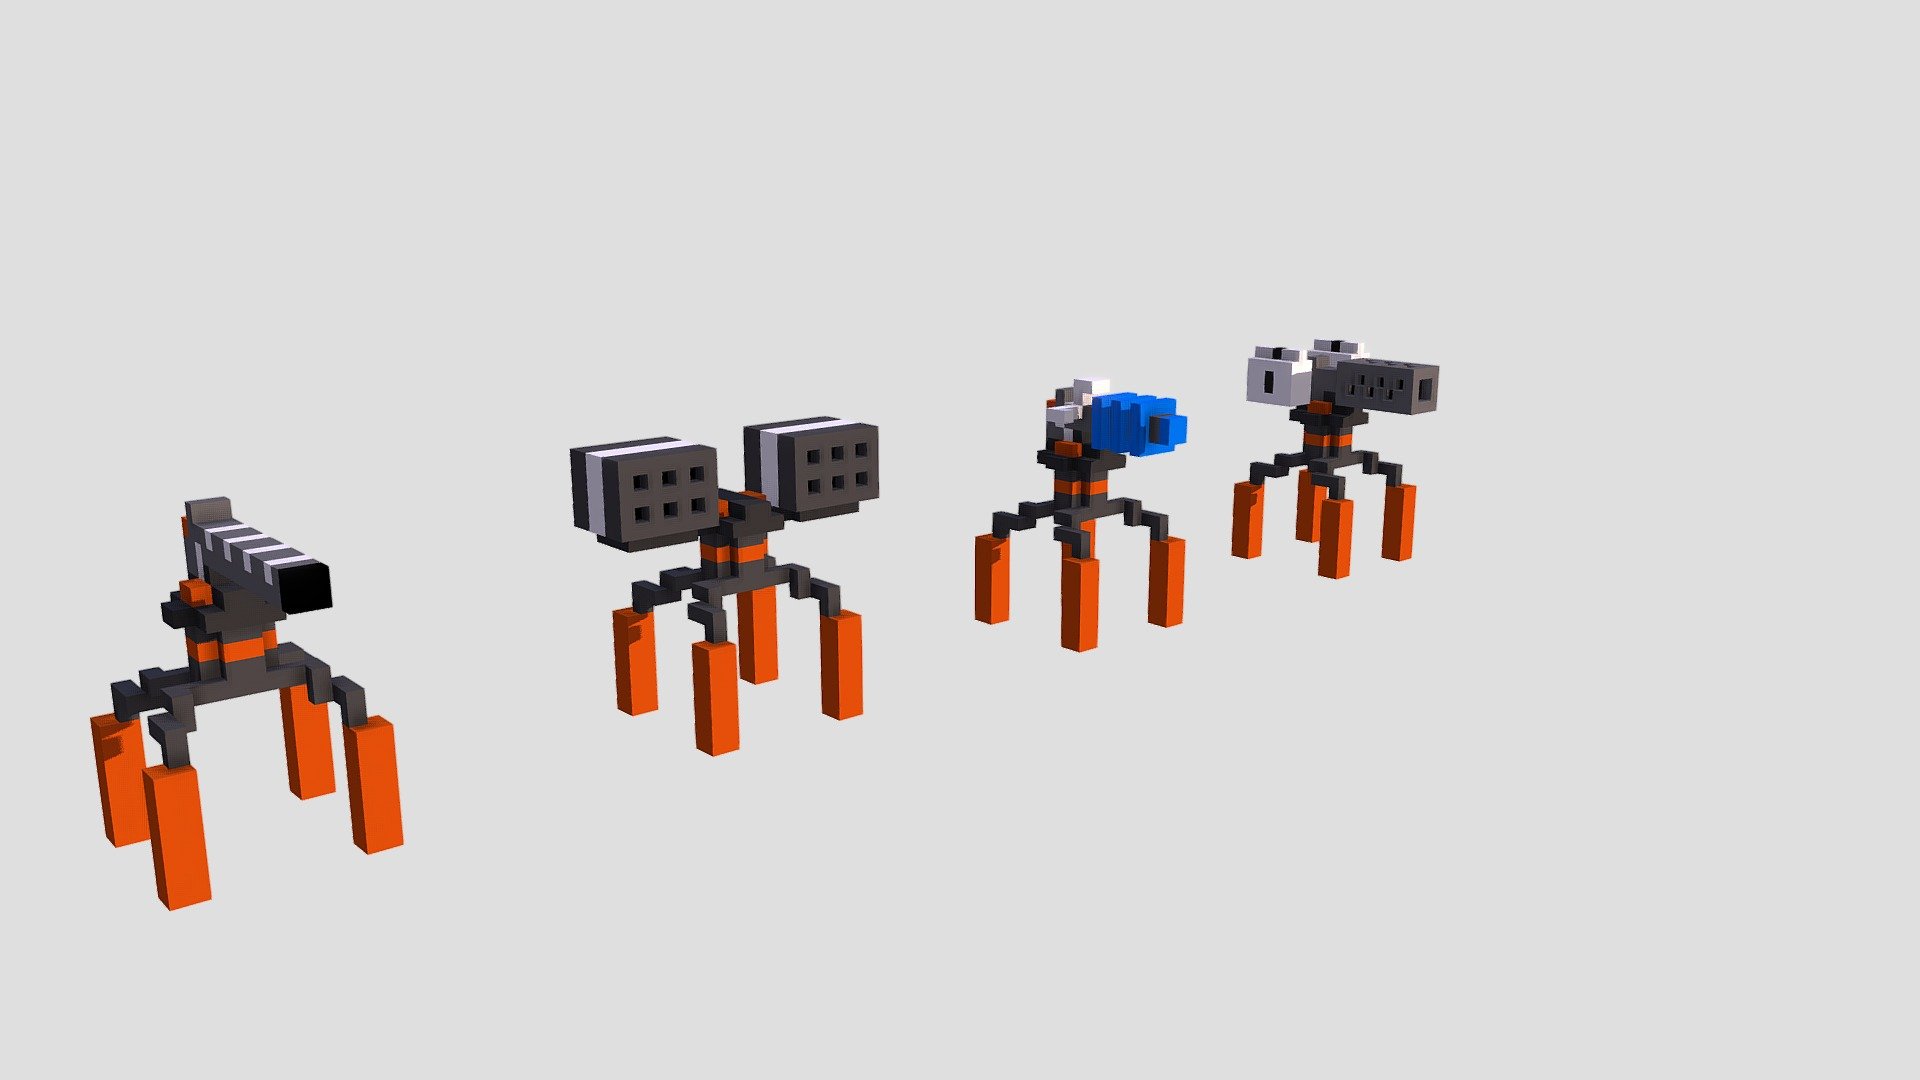 Some voxel turrets I made in a few minutes using Qubicle! From left to
 right the turrets are Normal, Rocket, Shock and flame 3d model